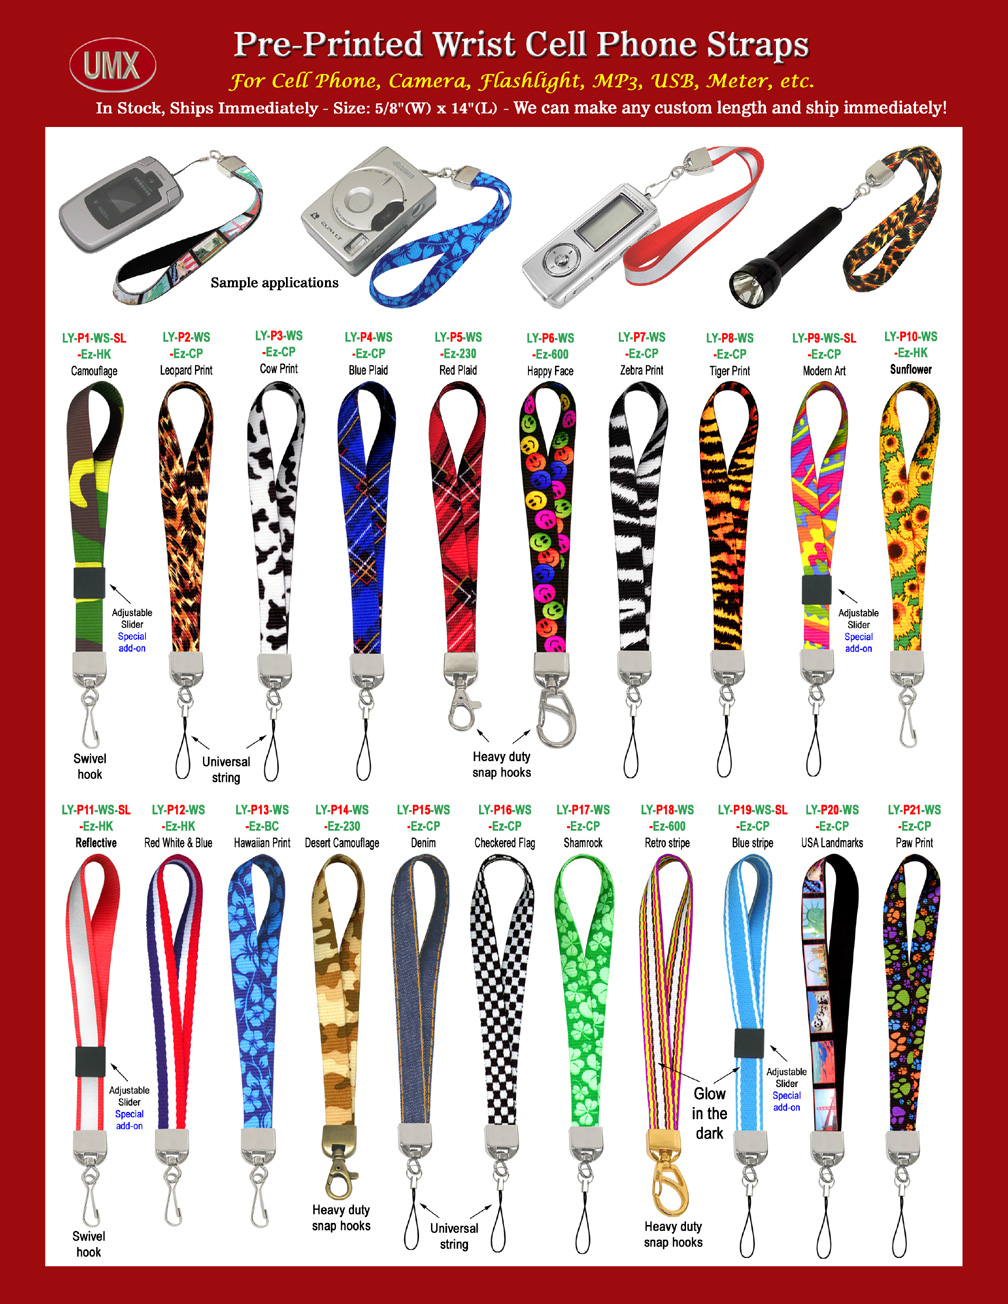 Cool Designed Pre-Printed Cell Phone Wrist Straps: For Cellular Phone, Camera or MP3 Wrist Wear: With Pre-Printed Themes.